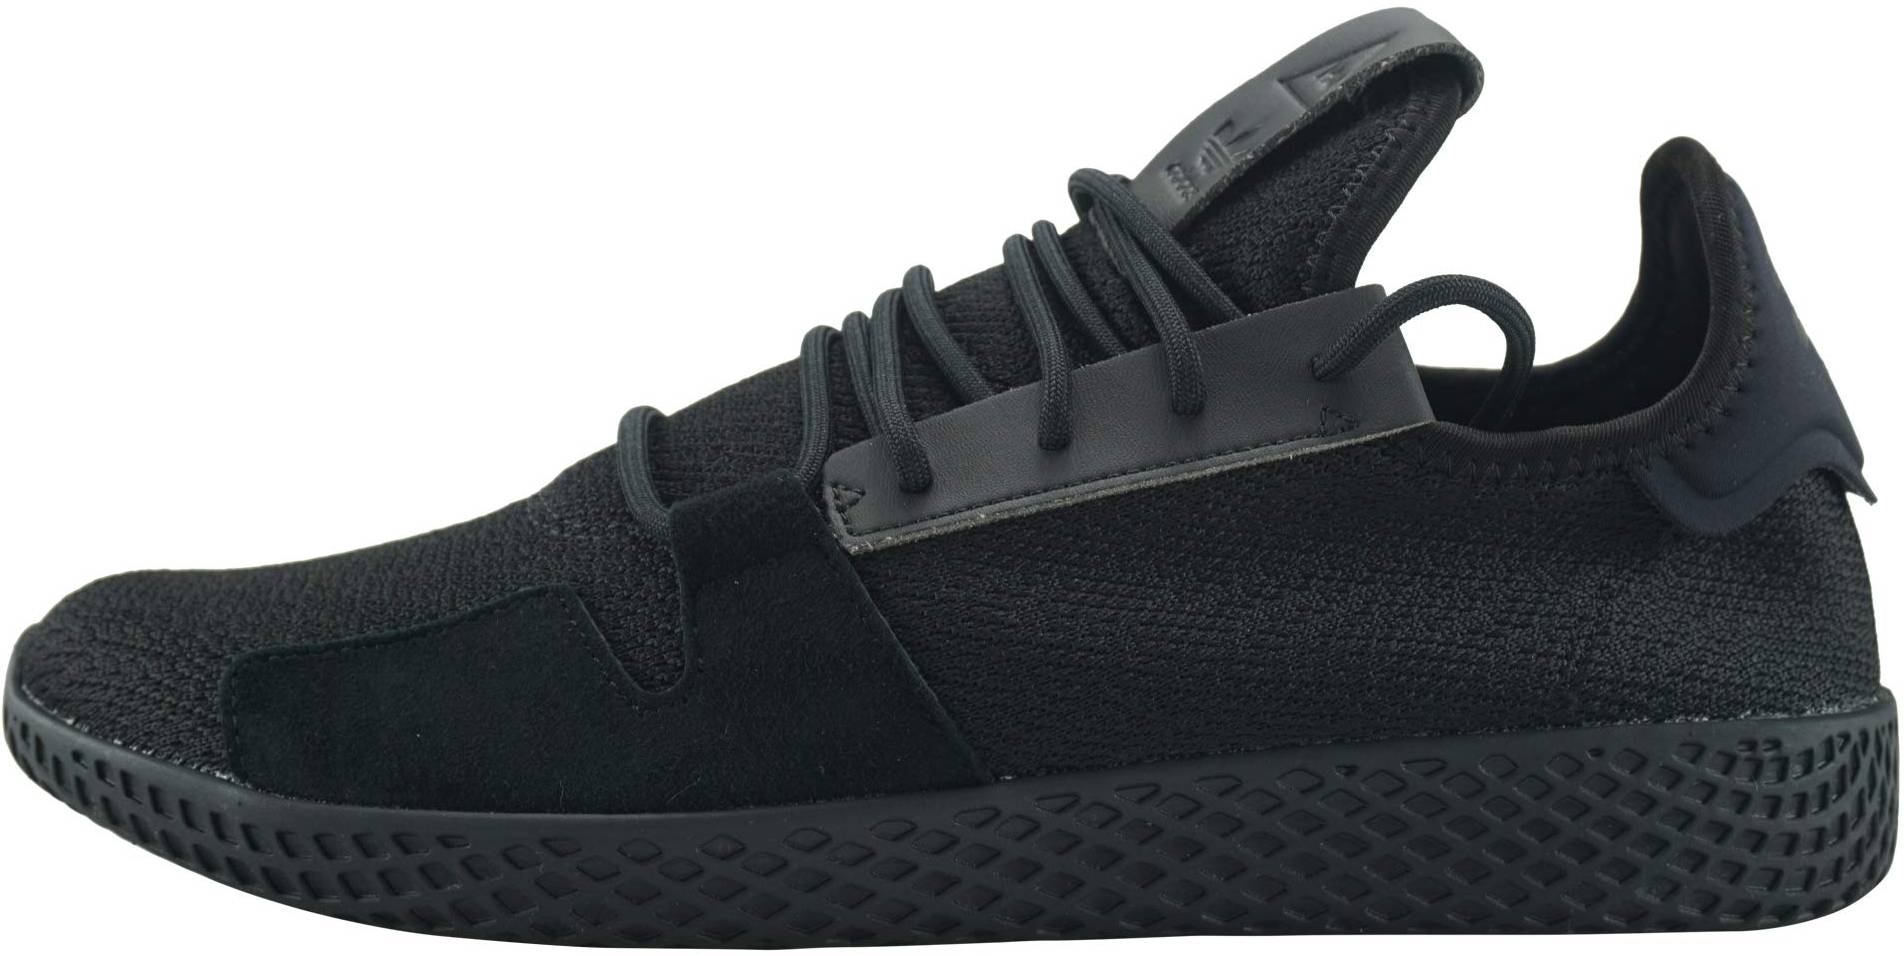 mass have a finger in the pie chapter Adidas Pharrell Williams Tennis Hu V2 sneakers in black + white (only $69)  | RunRepeat